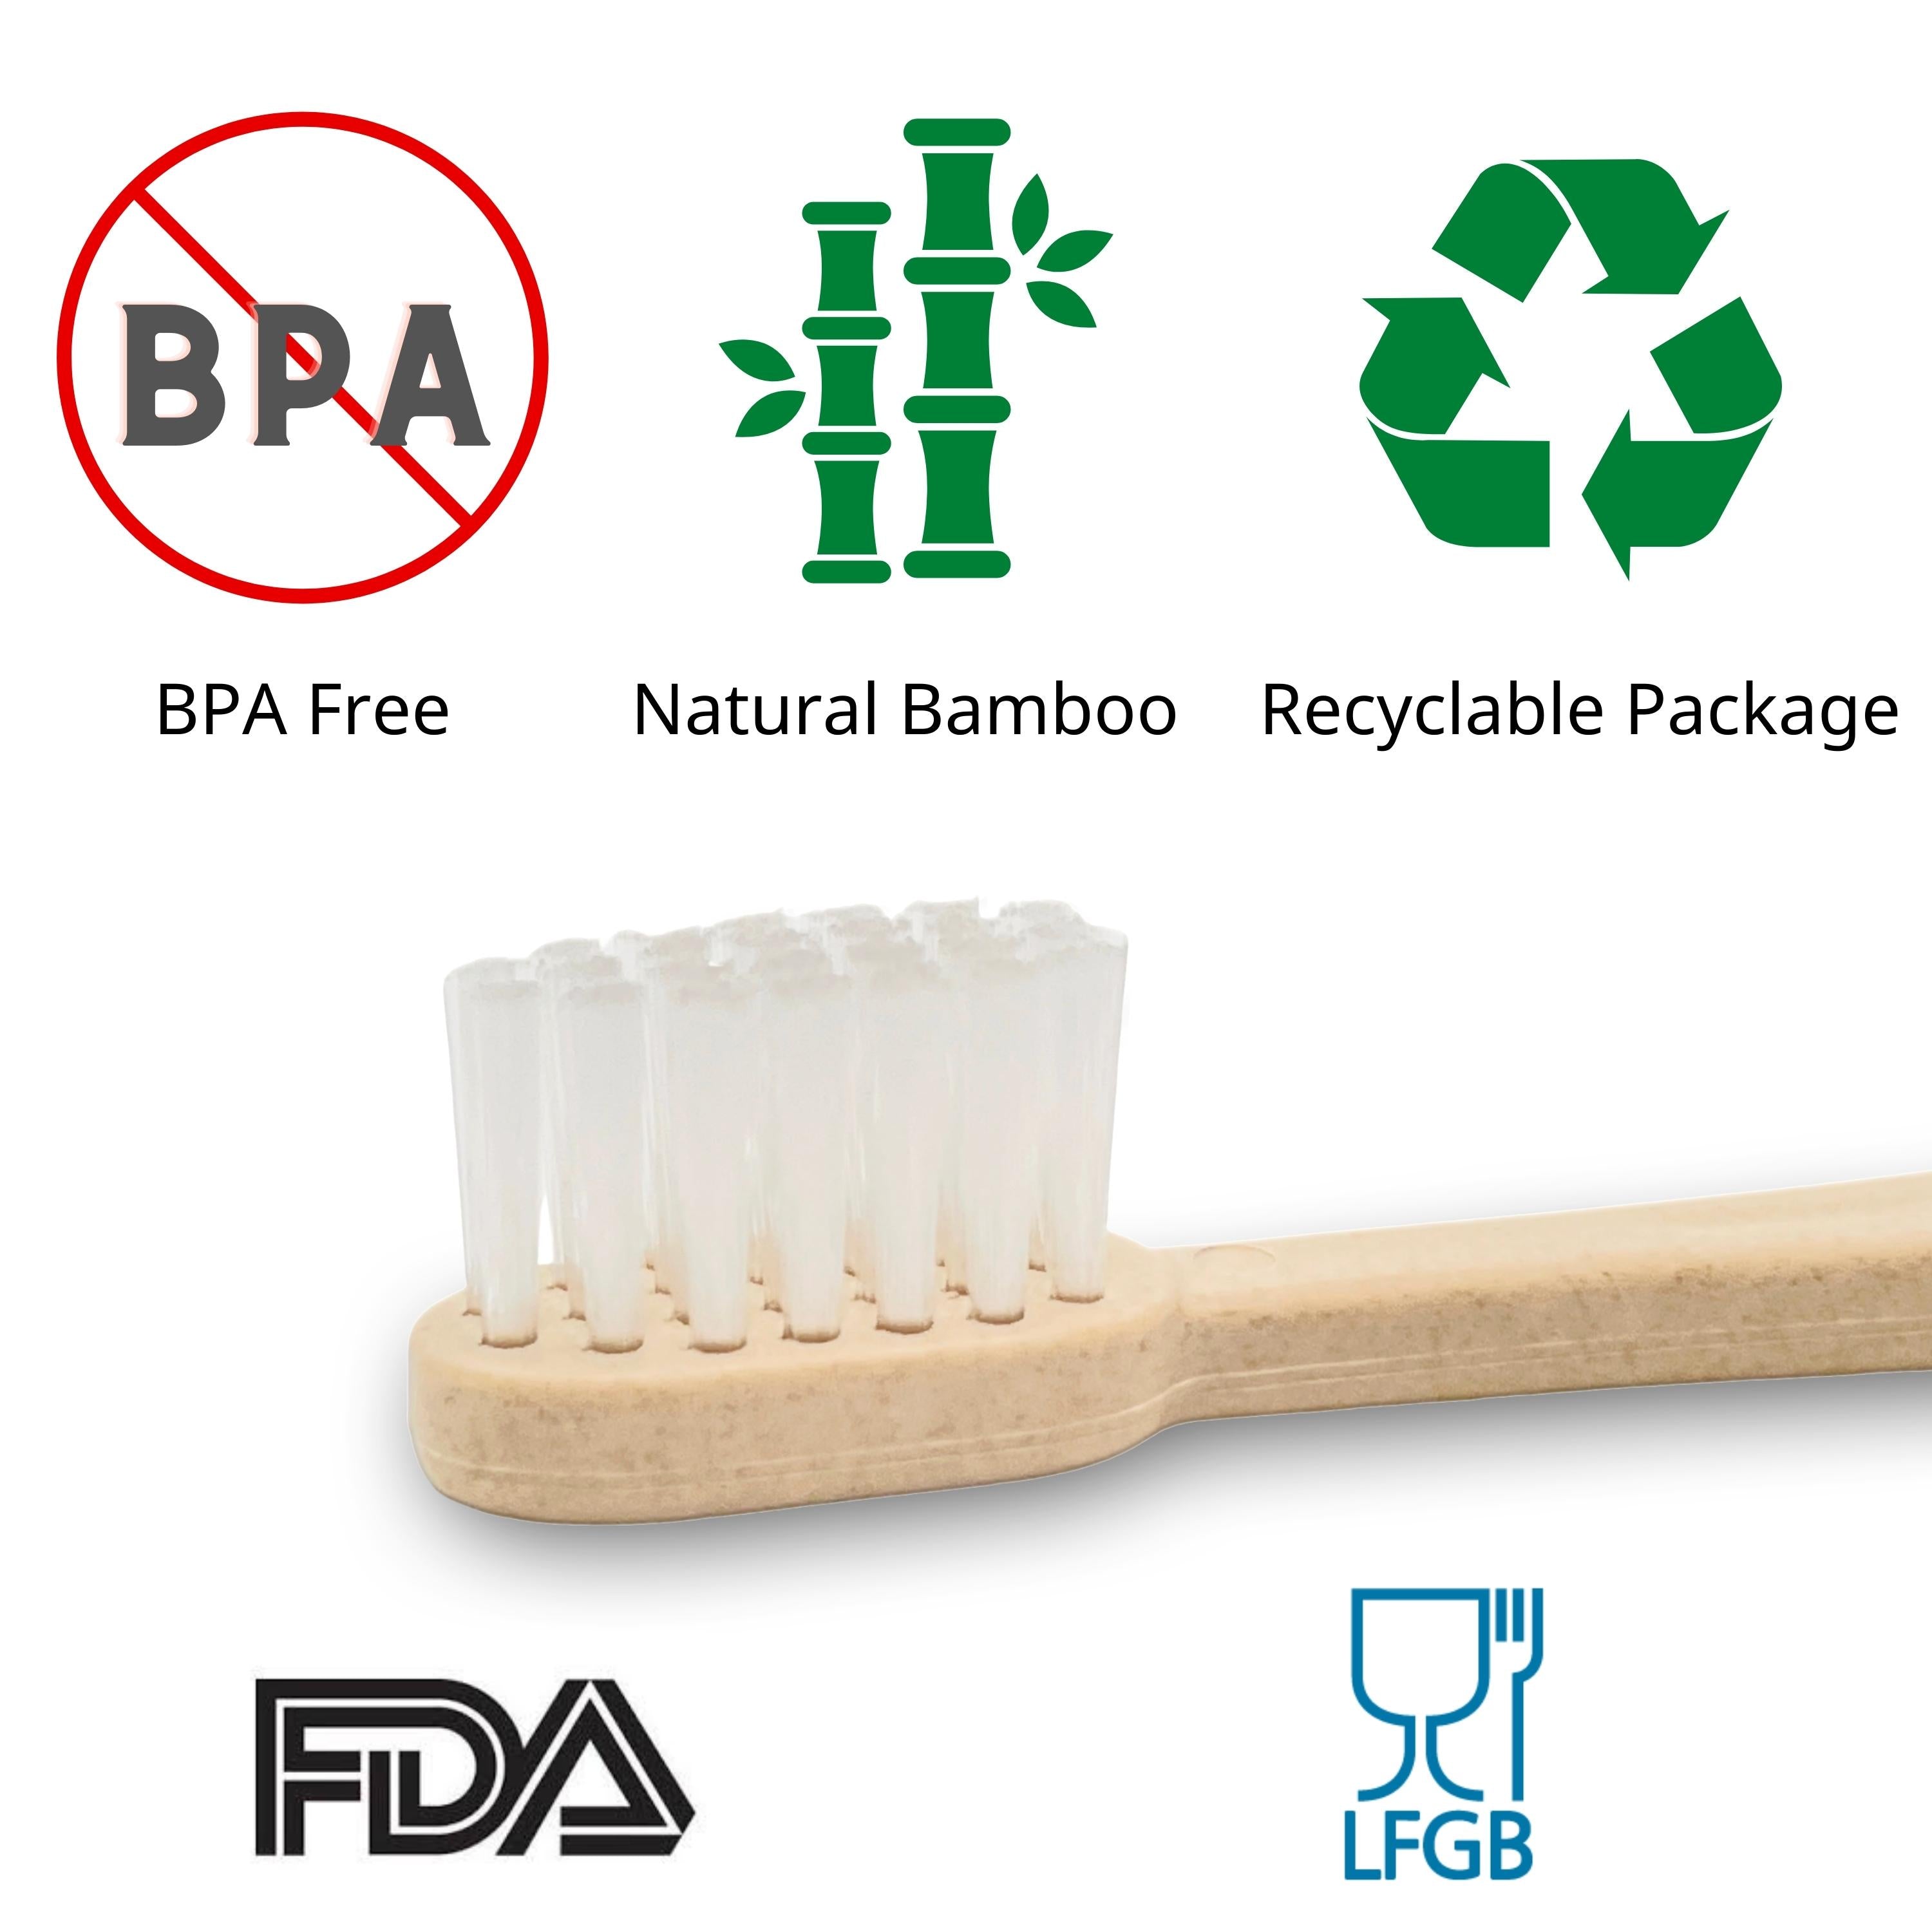 bamboo toothbrush soft bristles natural bpa-free eco-friendly compostable sustainable recyclable green manual travel hotel toothbrushes health 4 pack - CHANYI eco